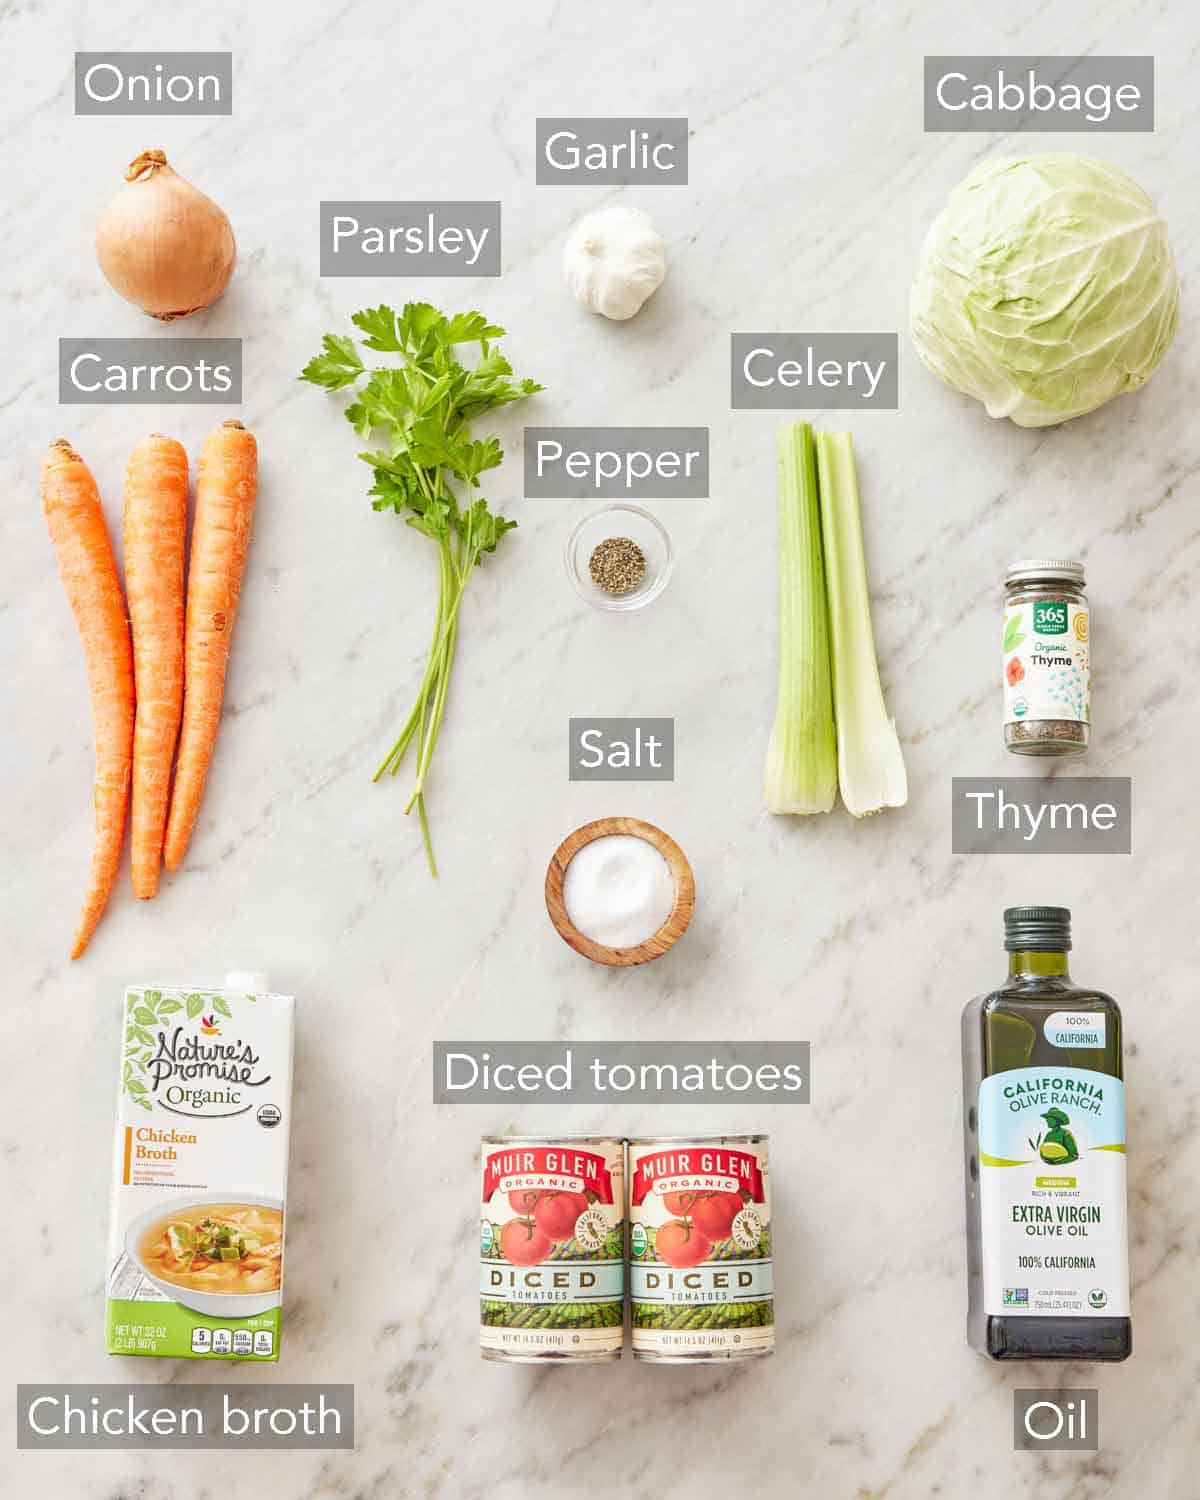 Ingredients needed to make cabbage soup.